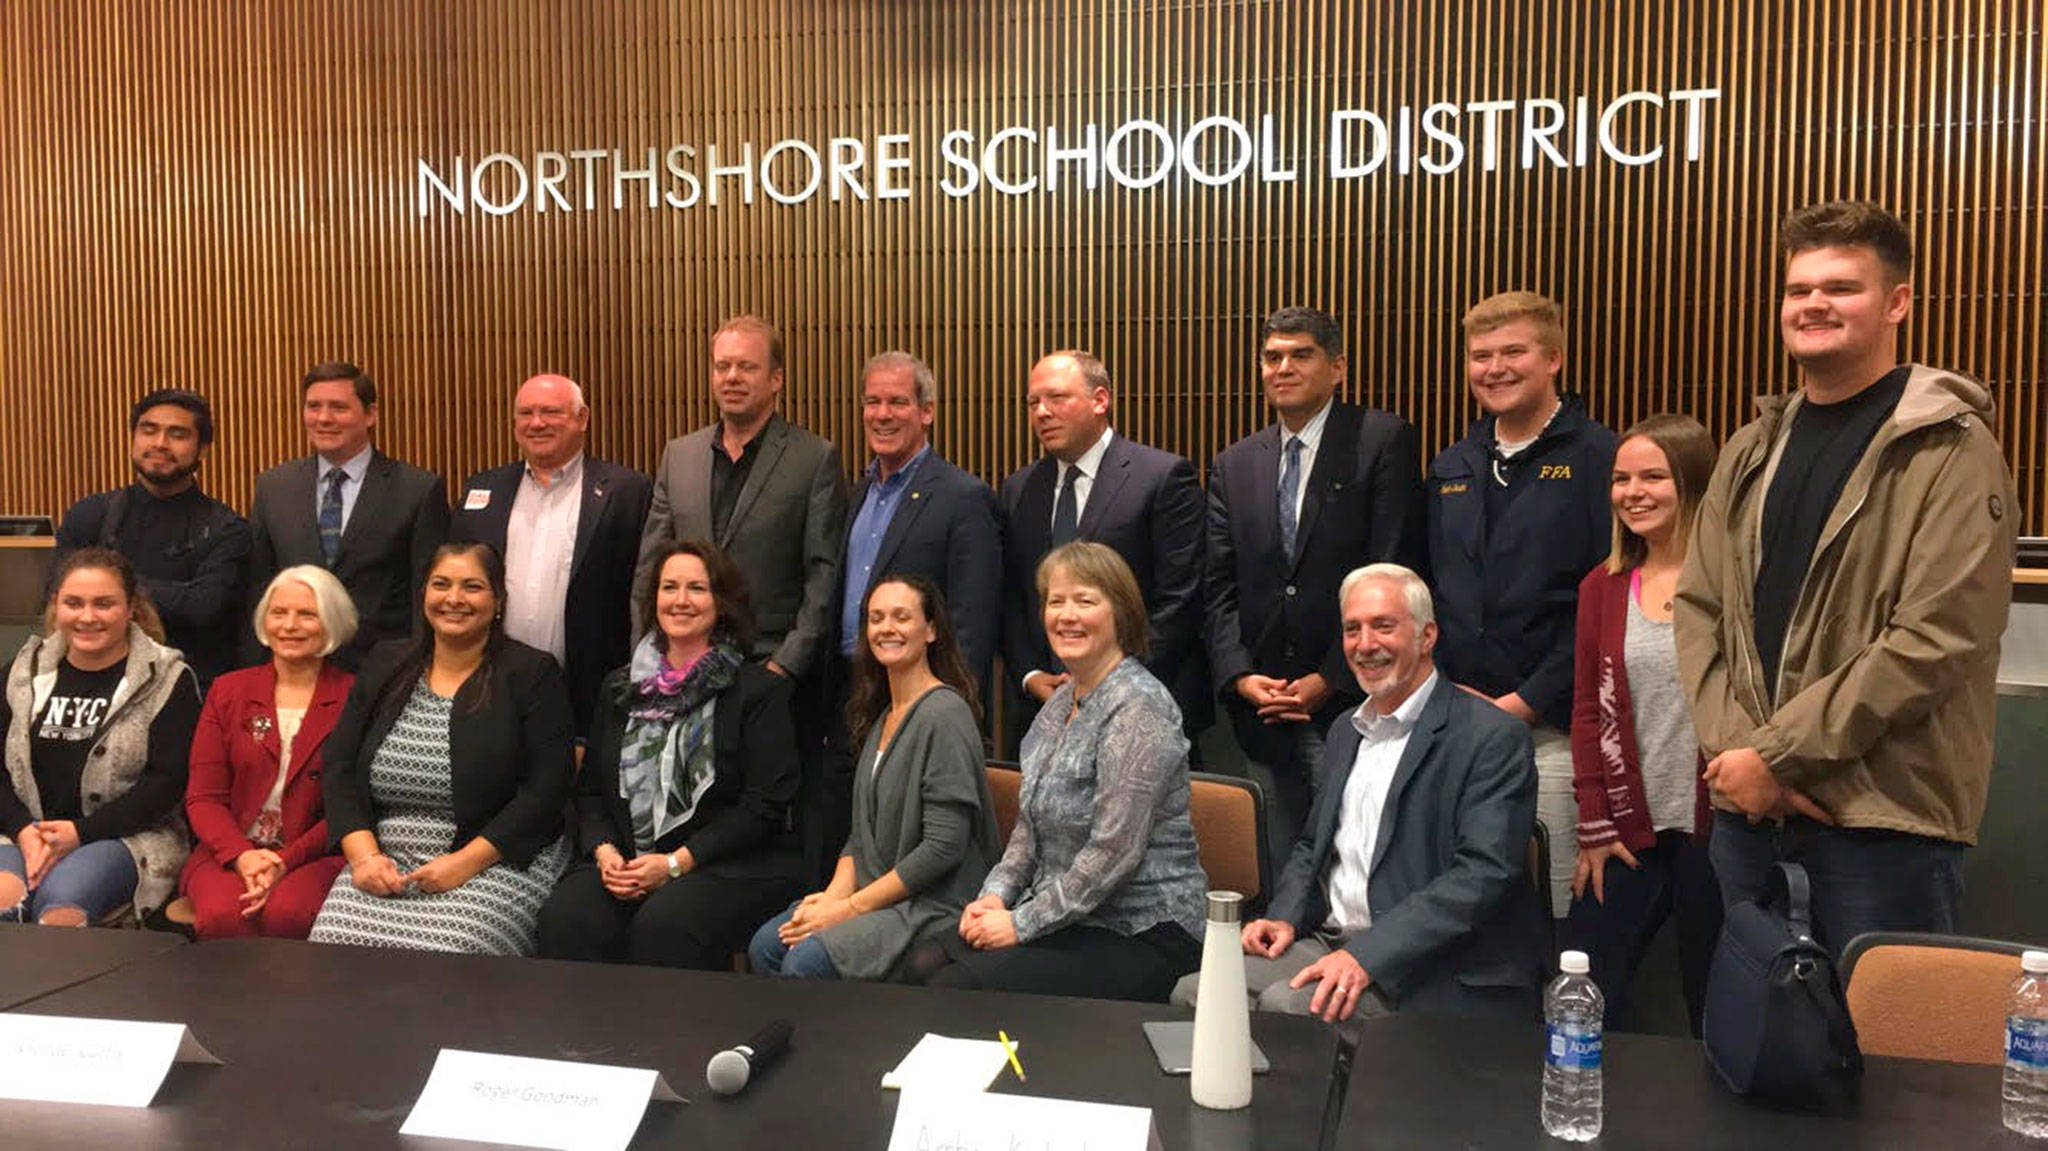 Candidates from the 1st, 45th and 46th districts pose with local college students after a voters’ forum sponsored by the Northshore Council PTSA. Katie Metzger/staff photo